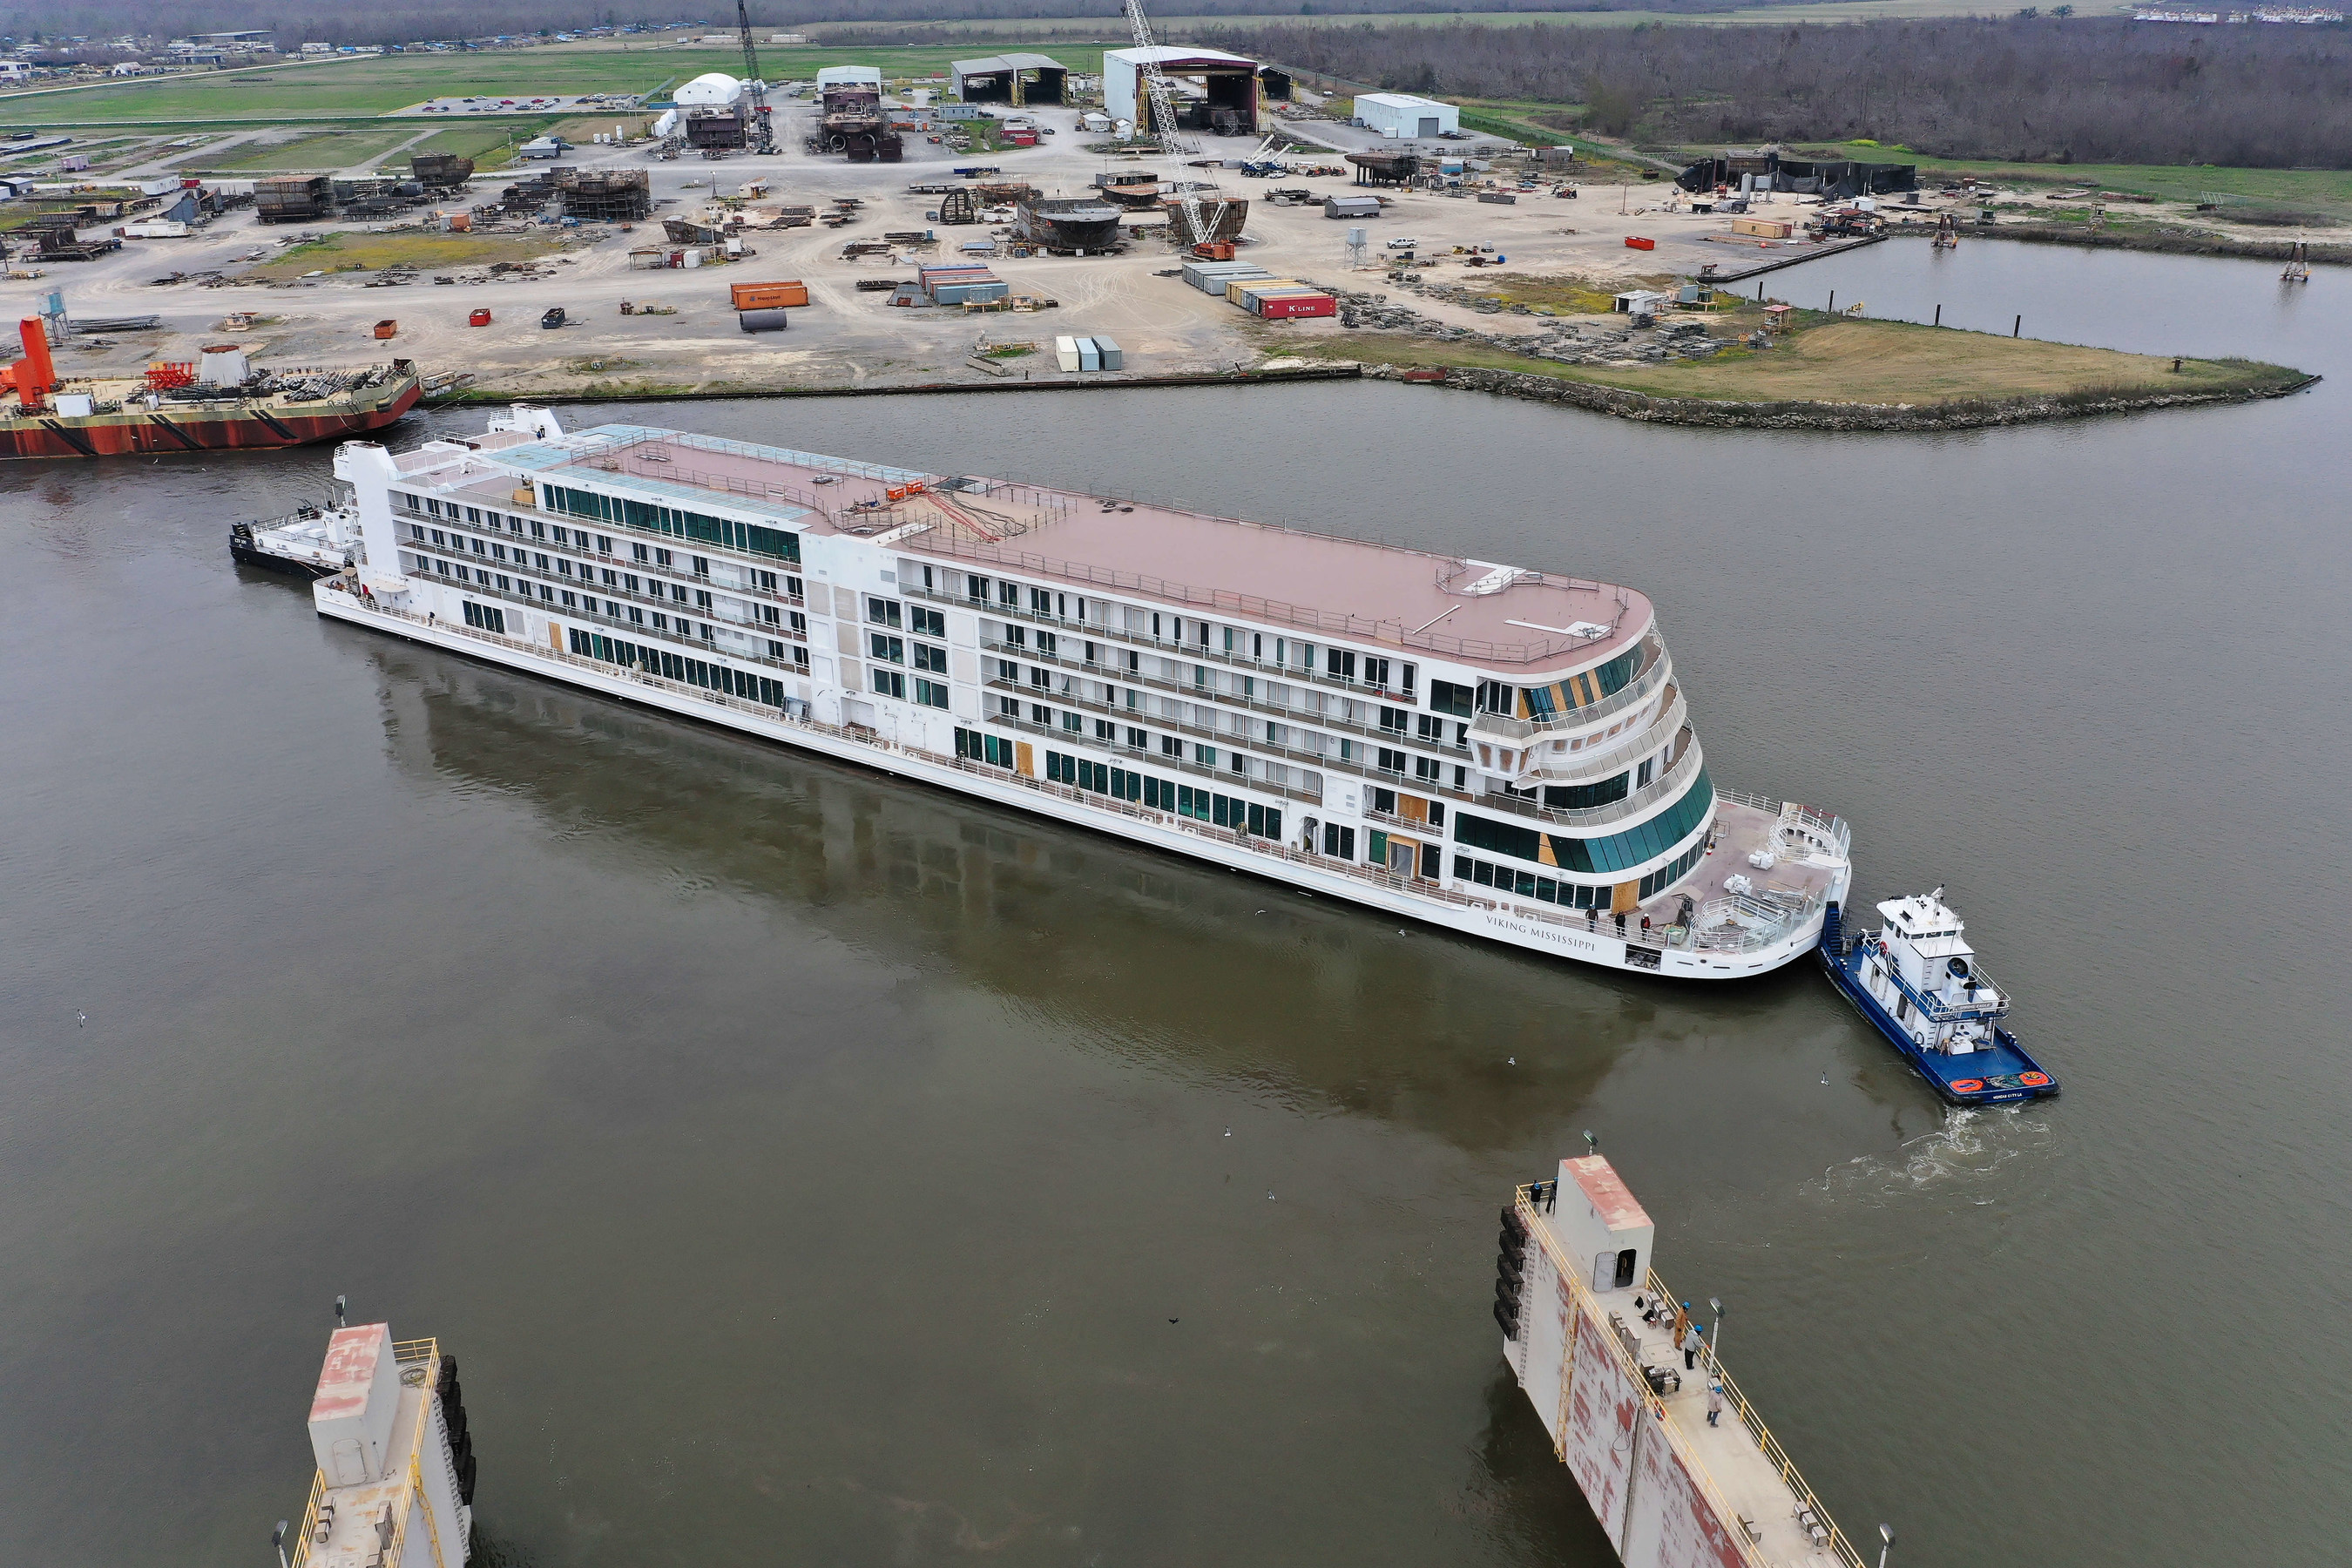 Viking celebrated today that the new 386-guest Viking Mississippi was floated out in Louisiana, marking a major construction milestone and the first time the ship has touched water  (March 2022)